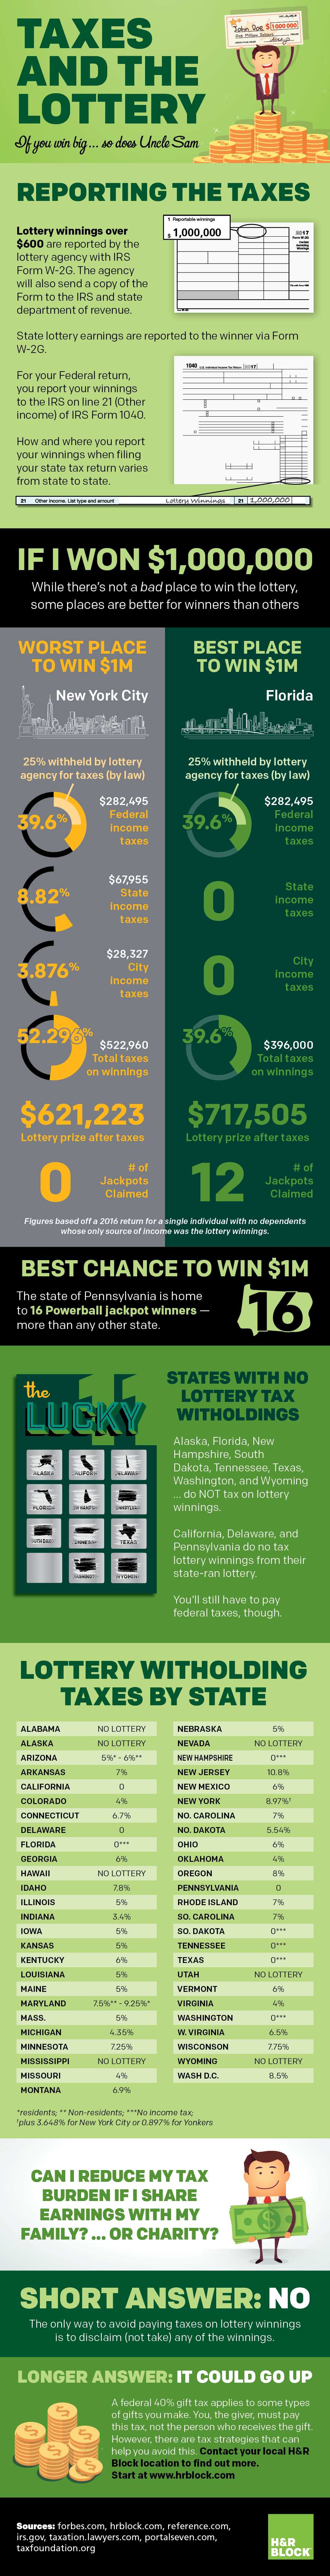 Taxes and the Lottery